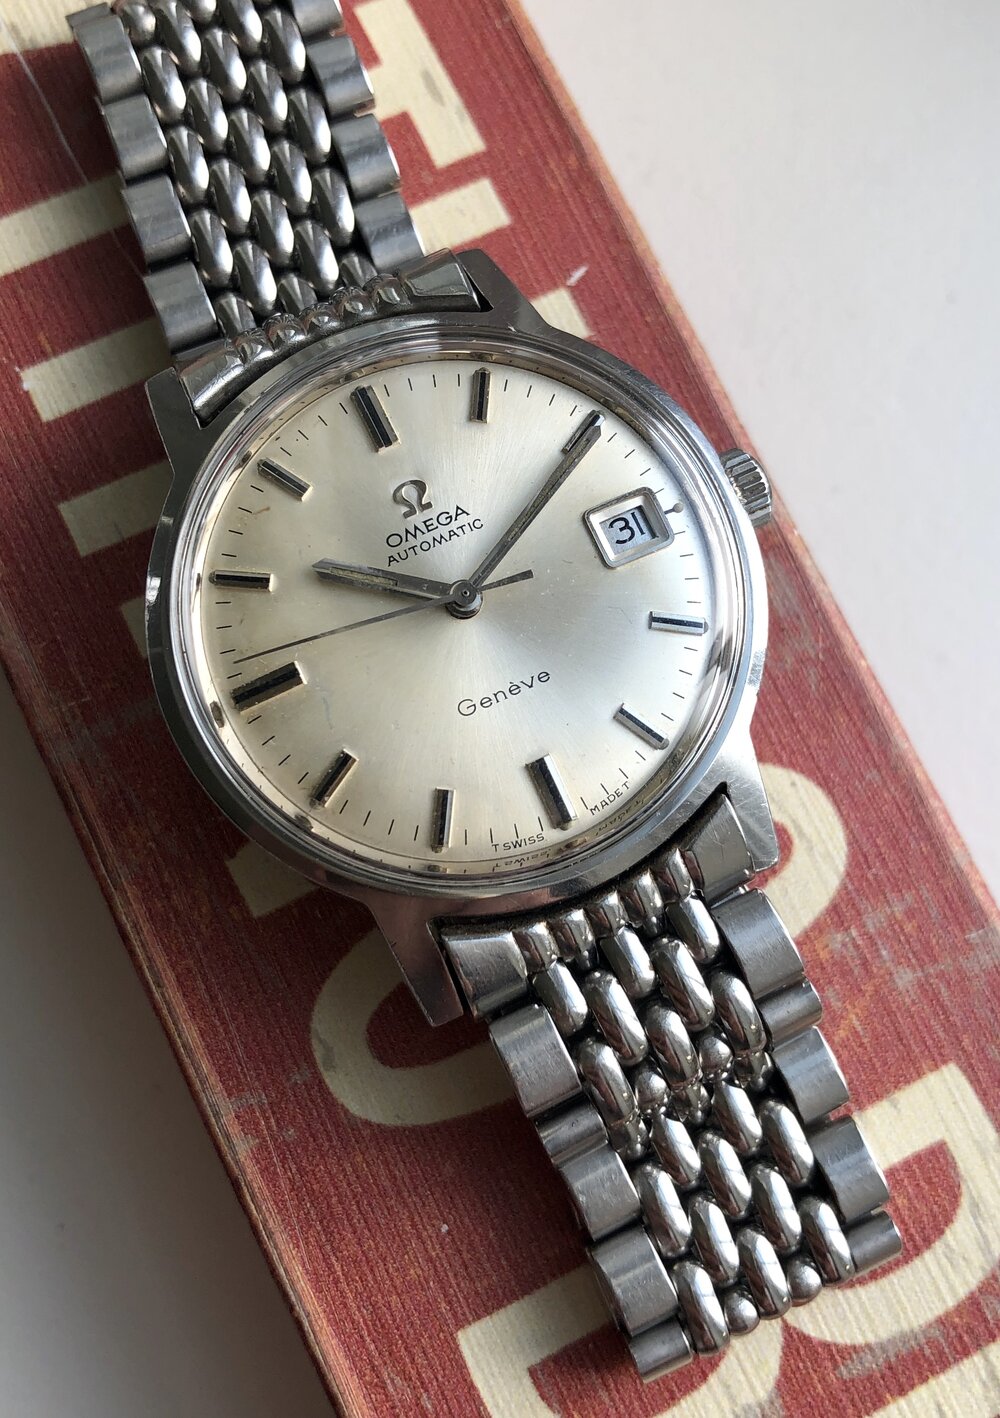 Omega Beads Of Rice Vintage Watch Steel Bracelet - Ref. 1068  for $424  for sale from a Trusted Seller on Chrono24